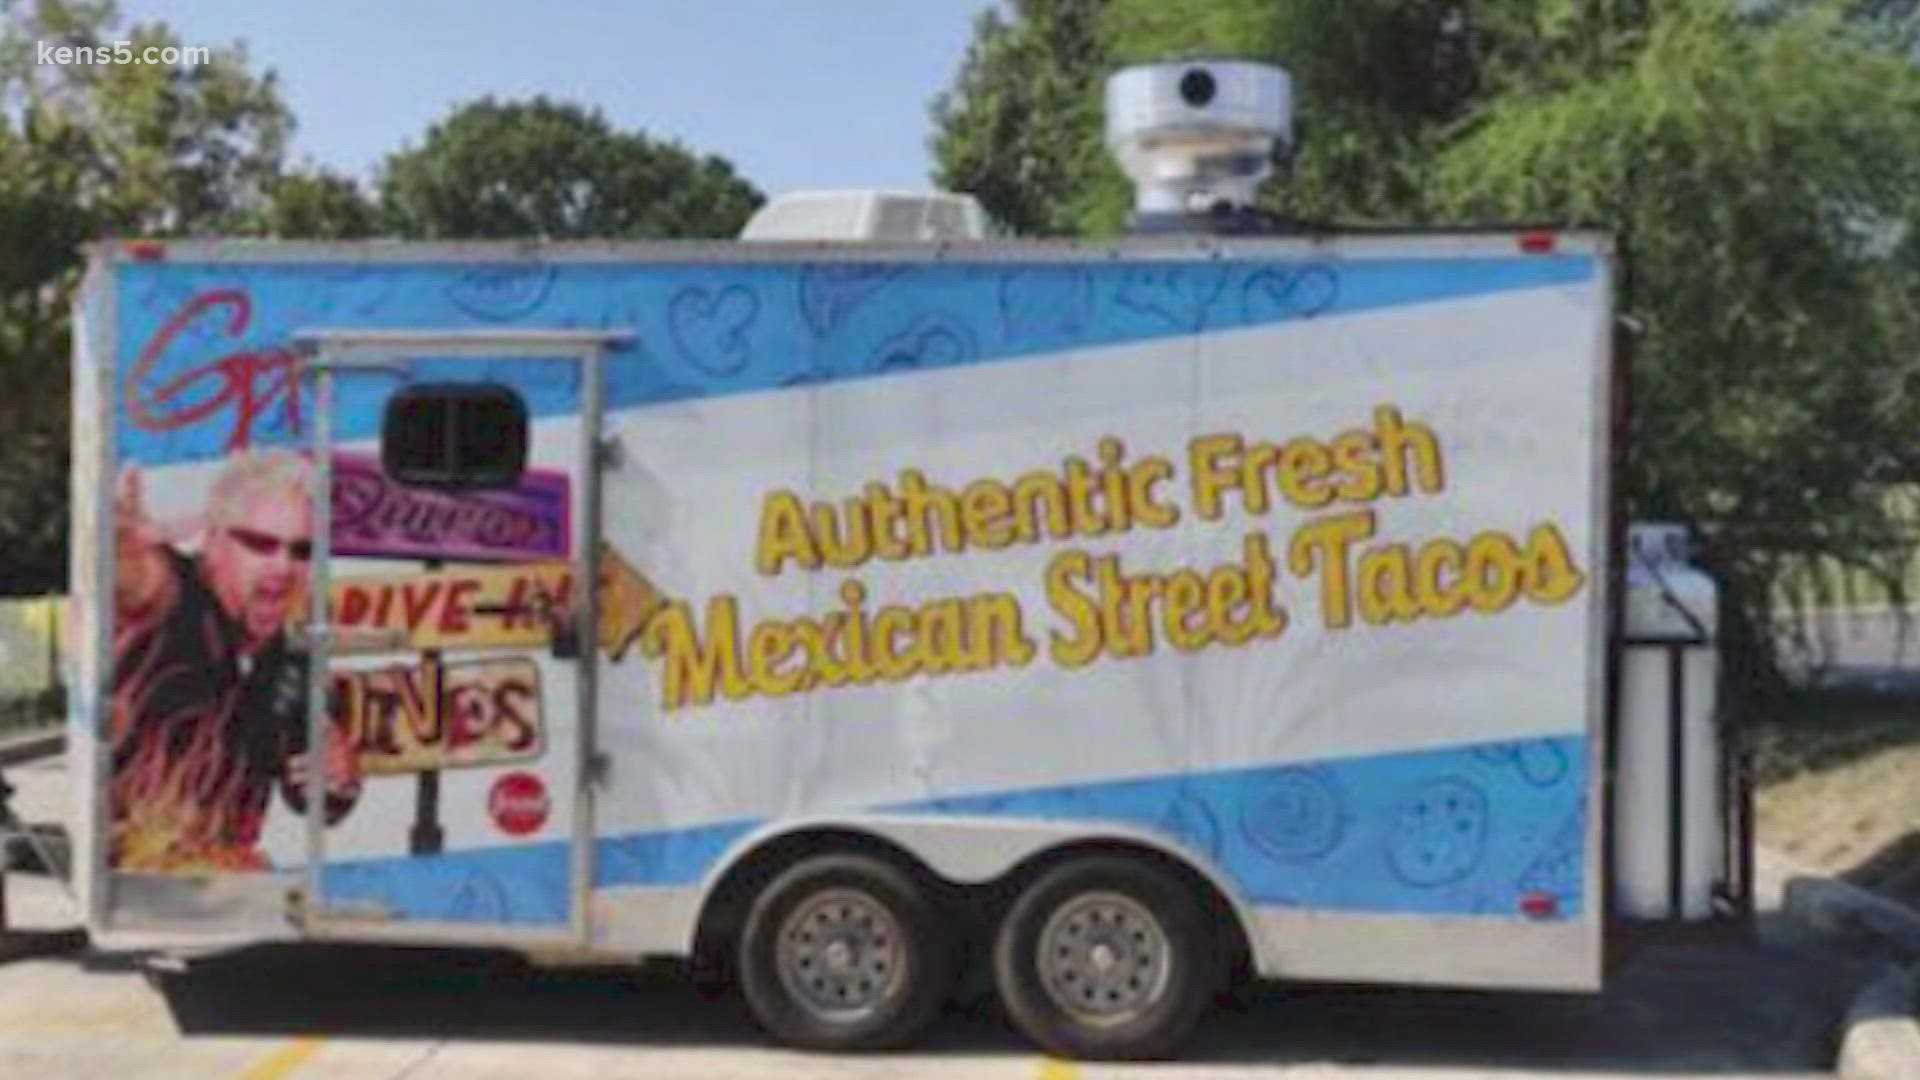 "Everything that we worked for was in that food truck."